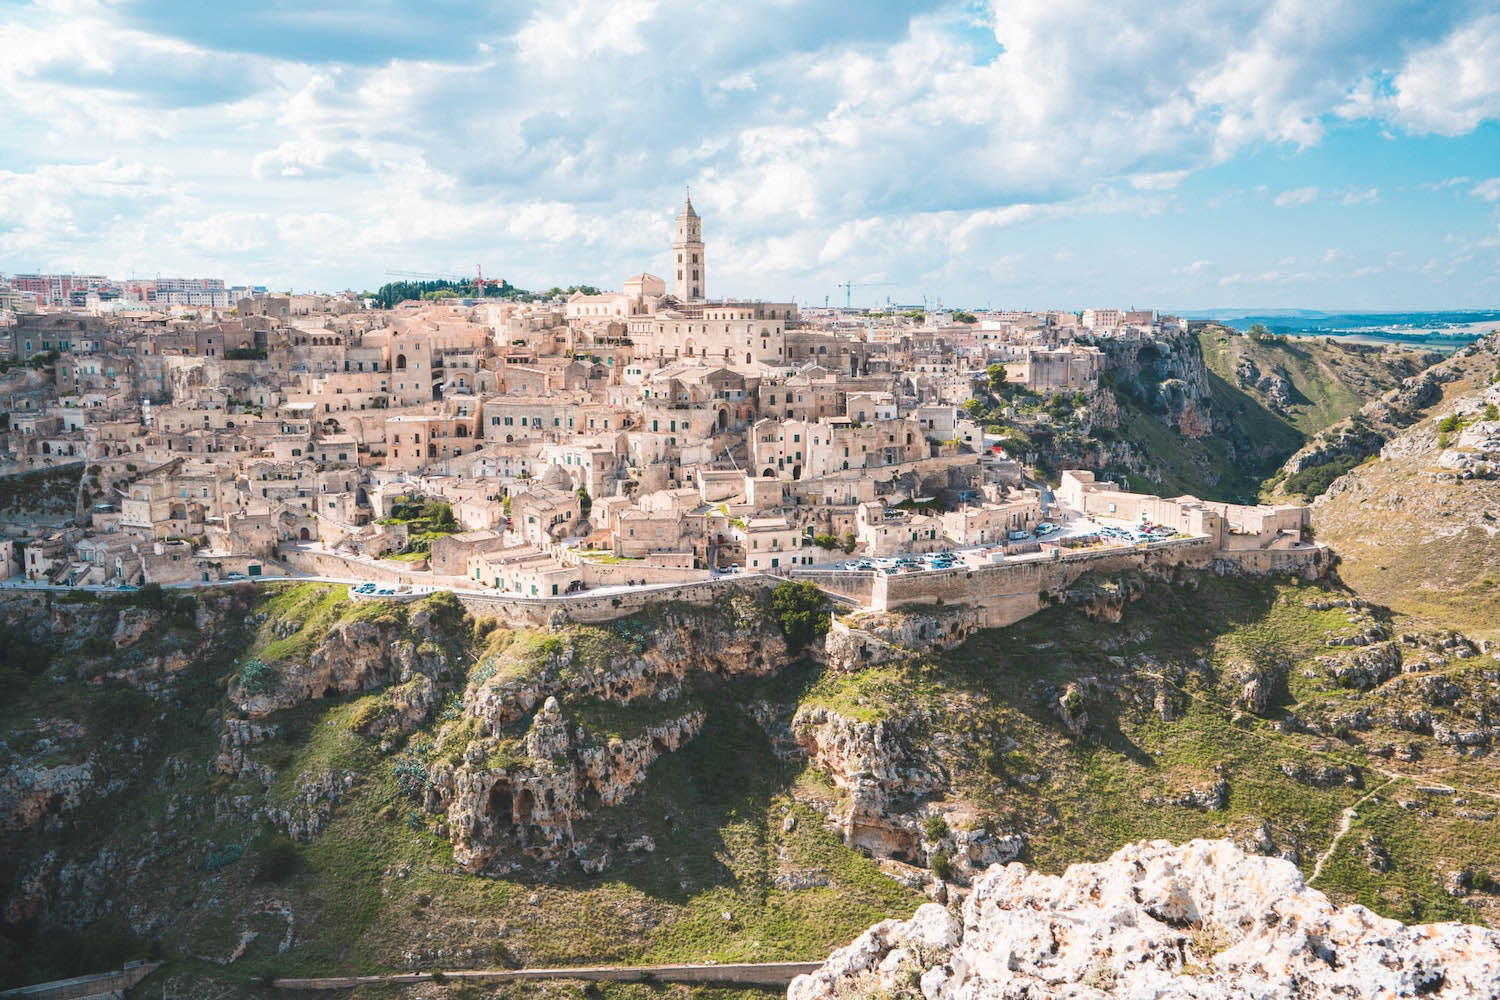 Wide photo of the old city of Matera, Italy